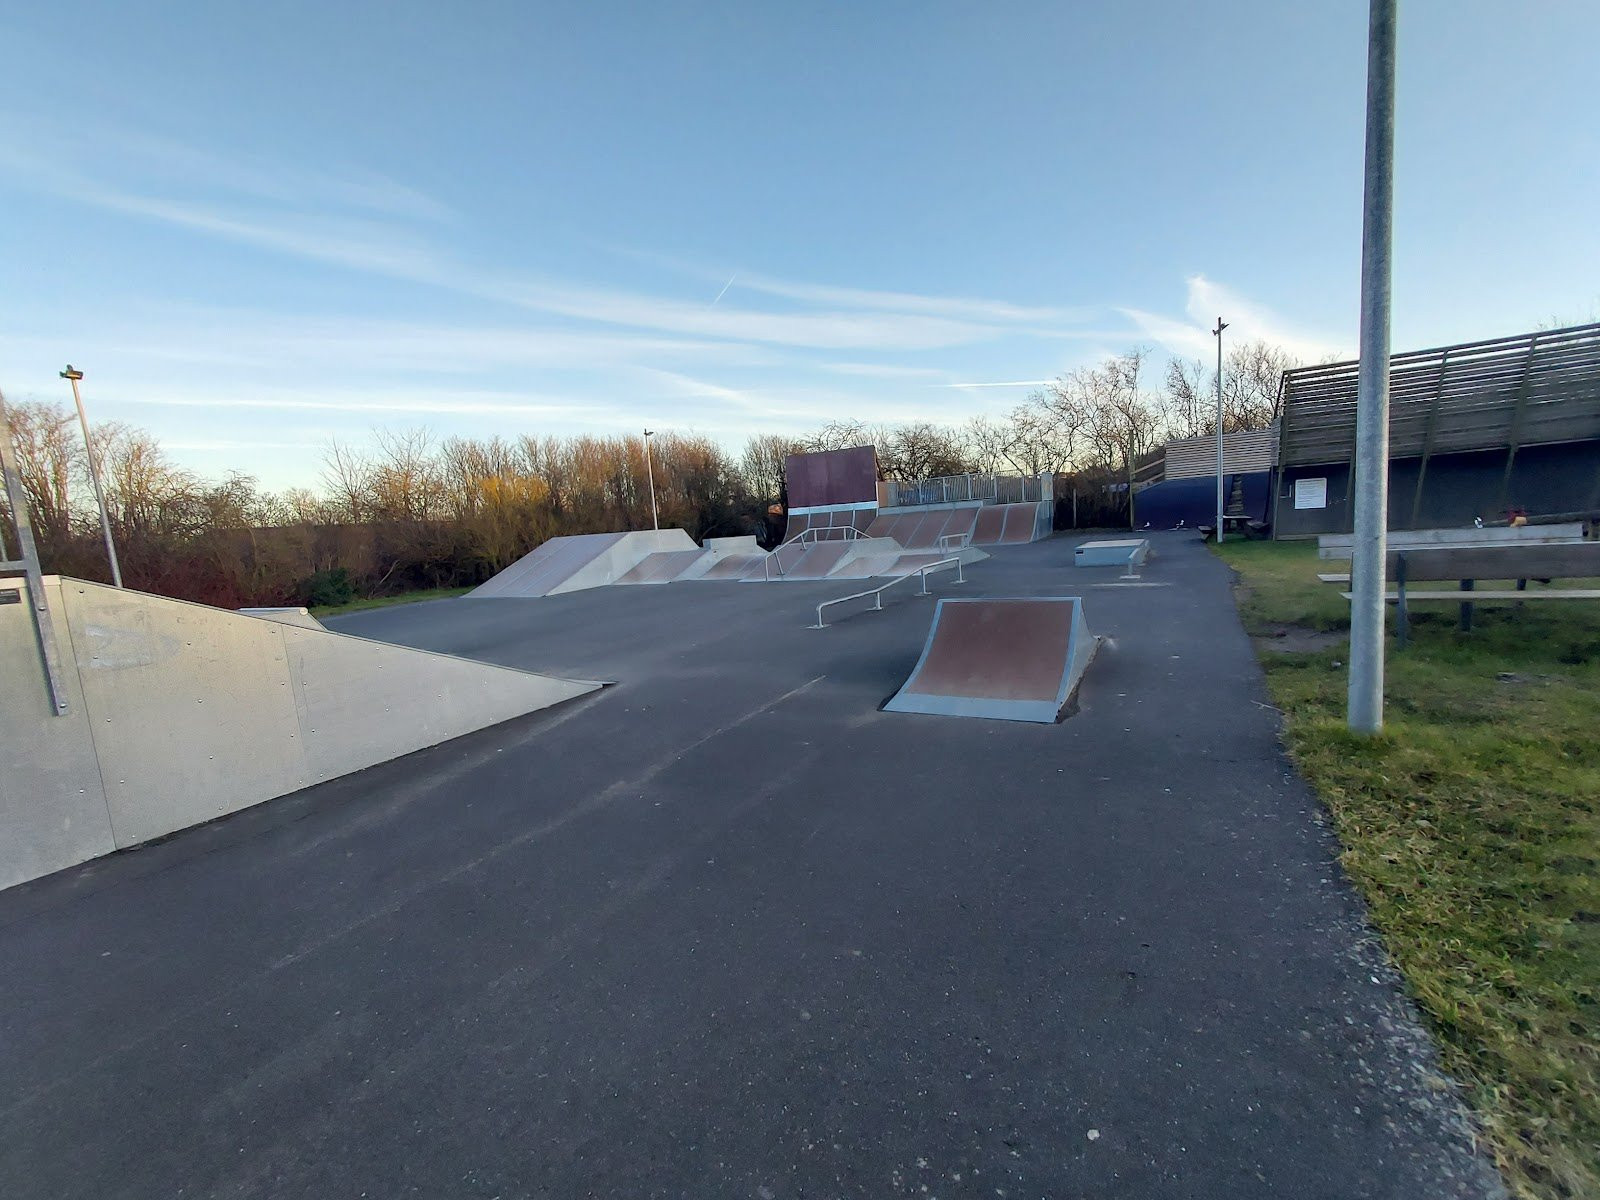 Randers skatepark has been designed according to the traditional rules when it comes to designing a skatepark. Place a quarter pipe in one end and a bank at the other end. Place obstacles in between the two, for example a pyramid box and some grind boxes and you have yourself a skatepark. Even though the park is build according to tradition, it still provides a good, solid and familiar experience for the skaters. The park has recently been renovated with new plates everywhere. The the left of the jump box is a spine. To the right you will find the fly-out box that you can see on the pictures. To the right of it you will see a good, solid fun box and to the right of that there is another fun box with an appurtenant euro gap.The park is definitely worth a visit – even if you have to travel far to get there and regardless of whether you are a beginner or a more experienced skater.&nbsp;At Randers skatepark there is also an old favourite among skaters; the mini vert. The mini vert is new and made of wood. The mini vert has a standard height of about 1.5 metres. &nbsp;